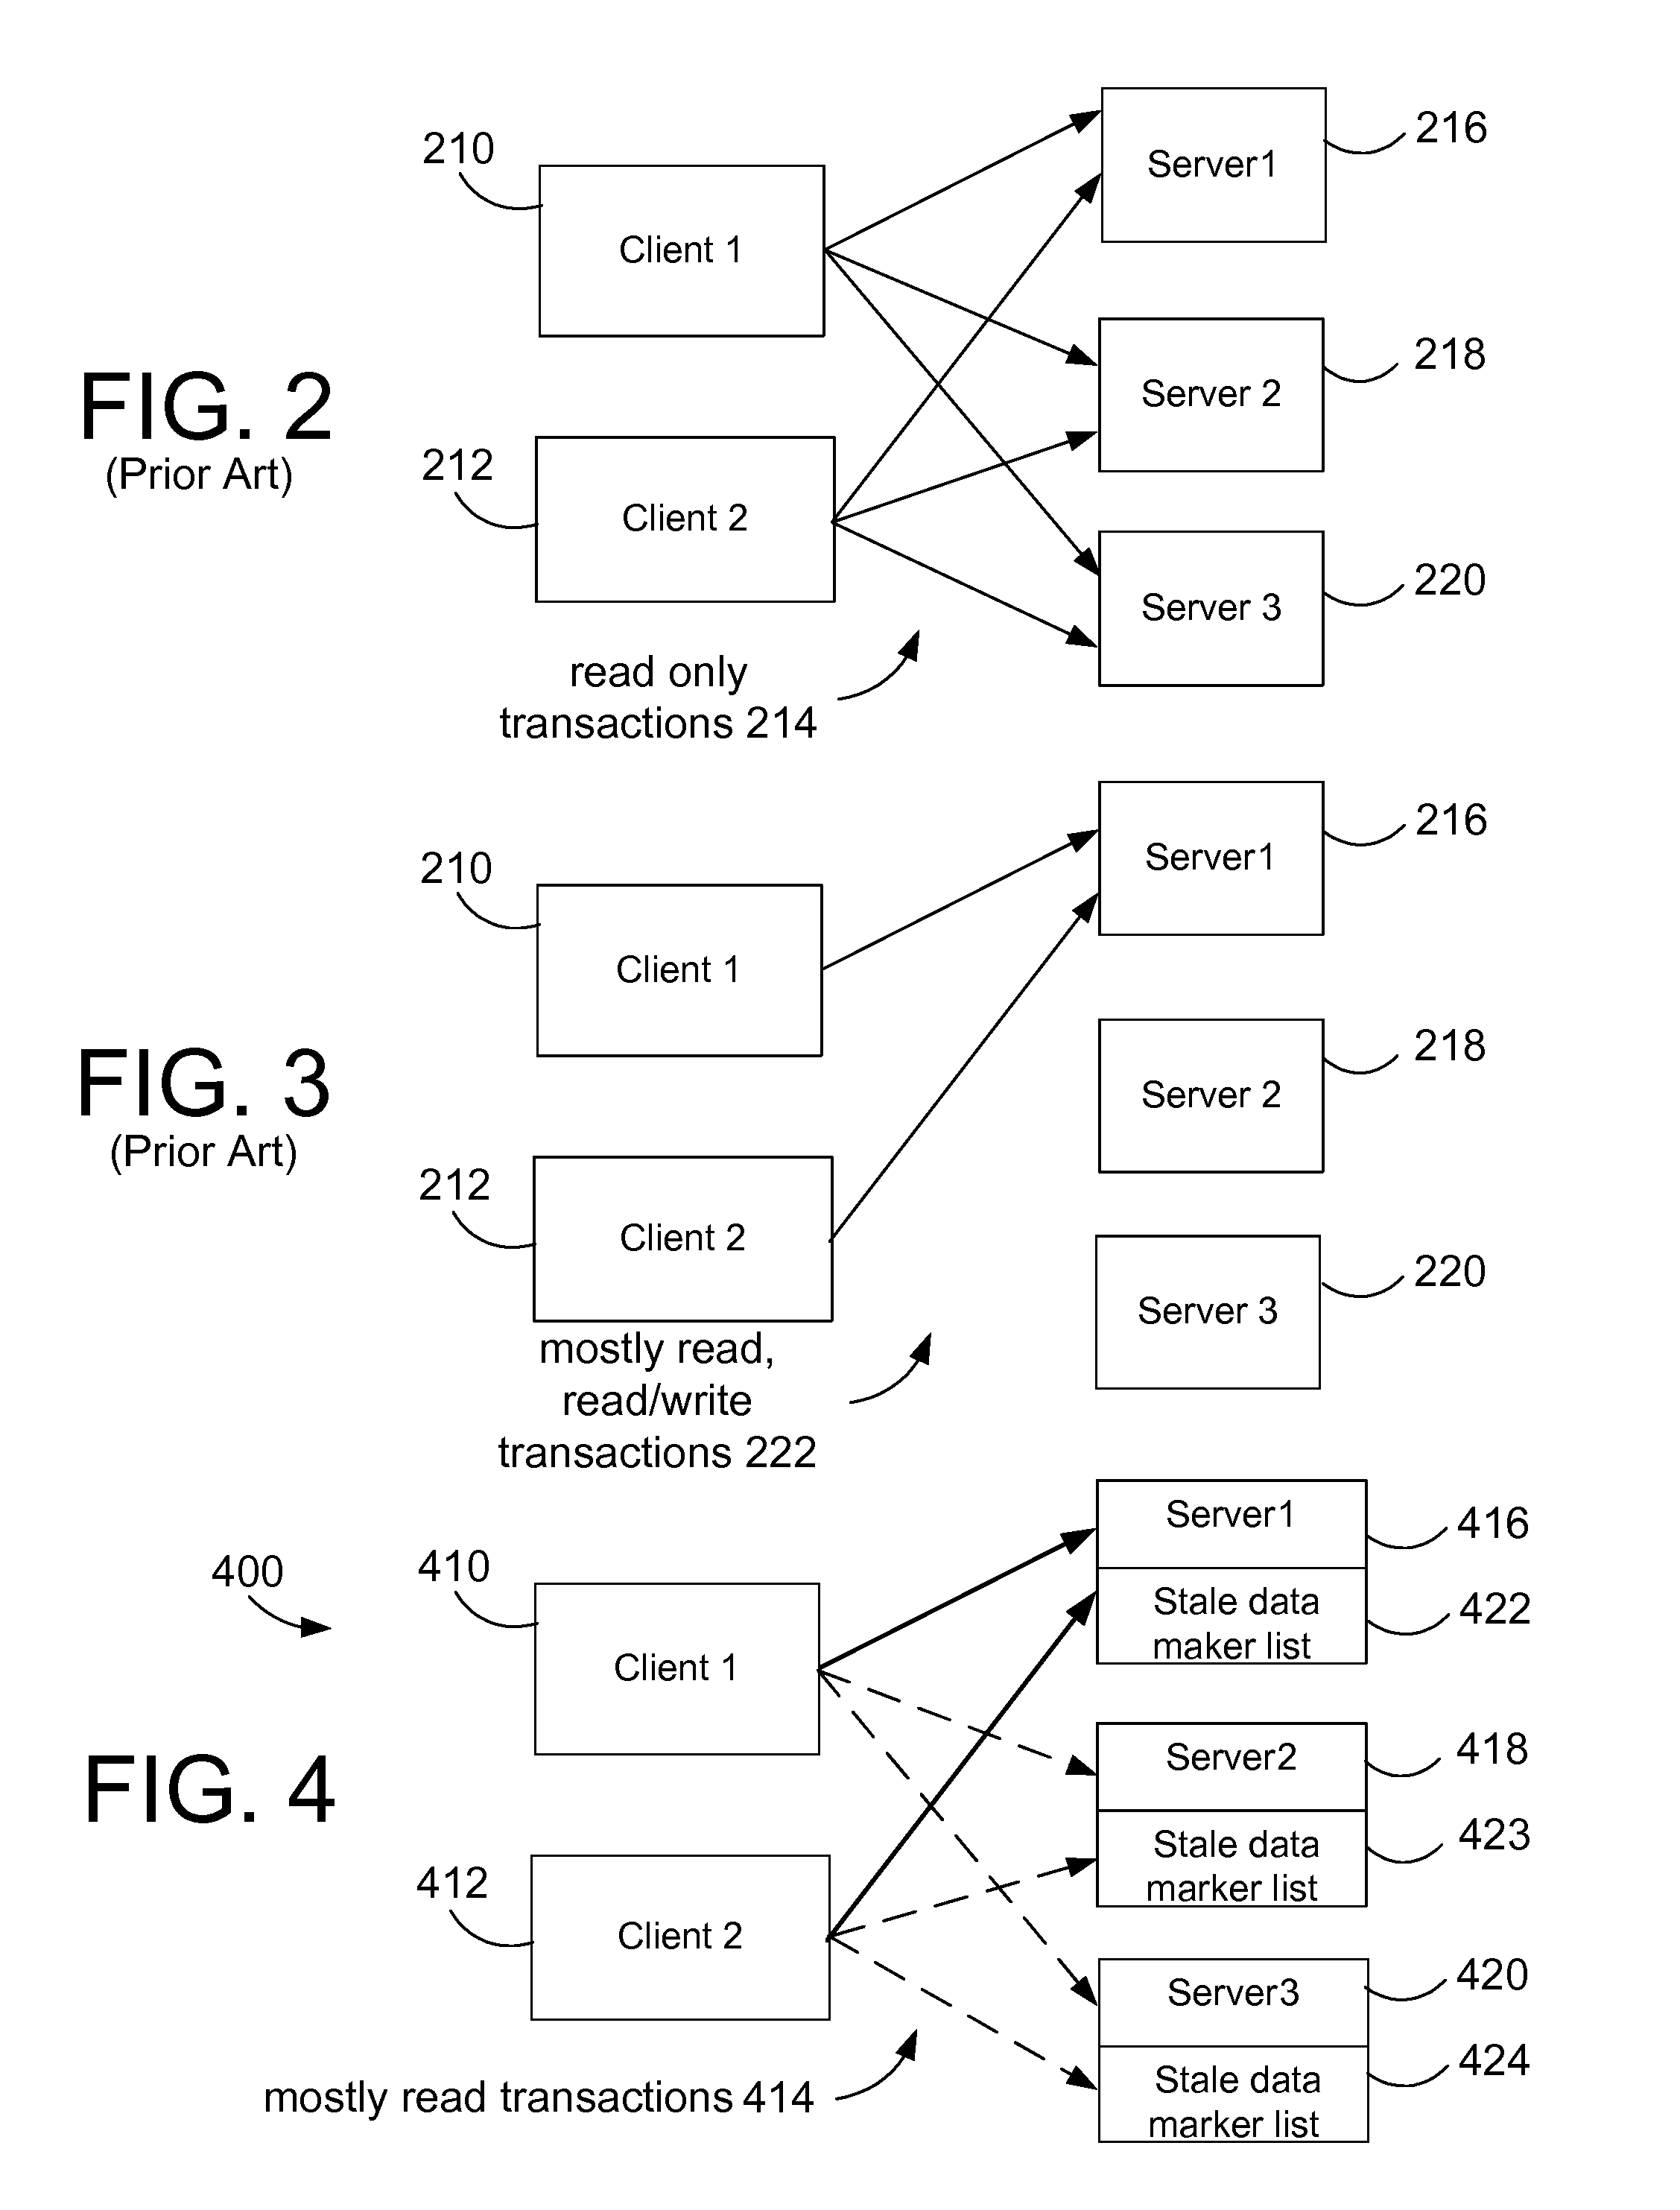 Apparatus and Method for Efficient Handling of Mostly Read Data in a Computer Server